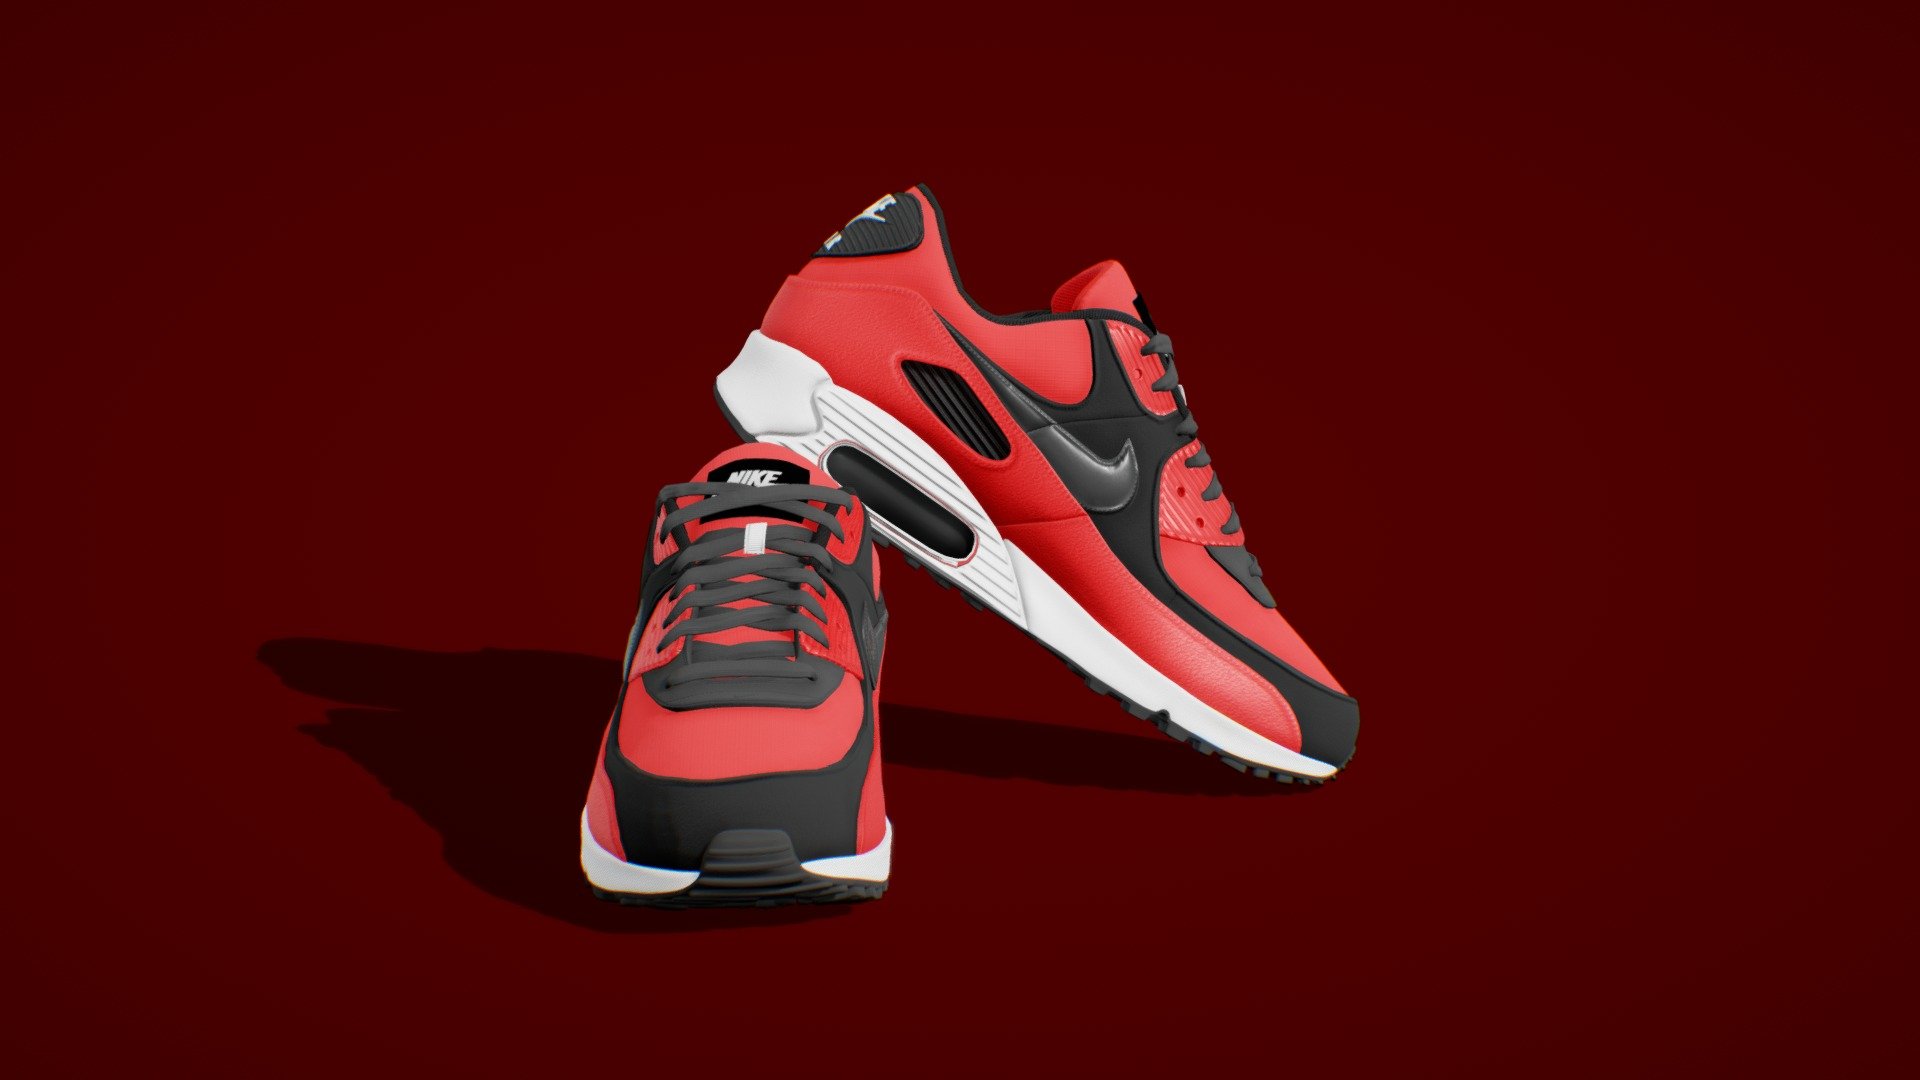 This are Airmax NIKE Shoes.
Textured differently,
There are 6 different textures and this is 2 of 6 Version.
Textures in 4k resolution.

Buy the whole pack of 6 at 50% OFF Here
https://skfb.ly/oxQVu - Airmax - Nike Shoes 02 - Buy Royalty Free 3D model by 5th Dimension (@5th-Dimension) 3d model